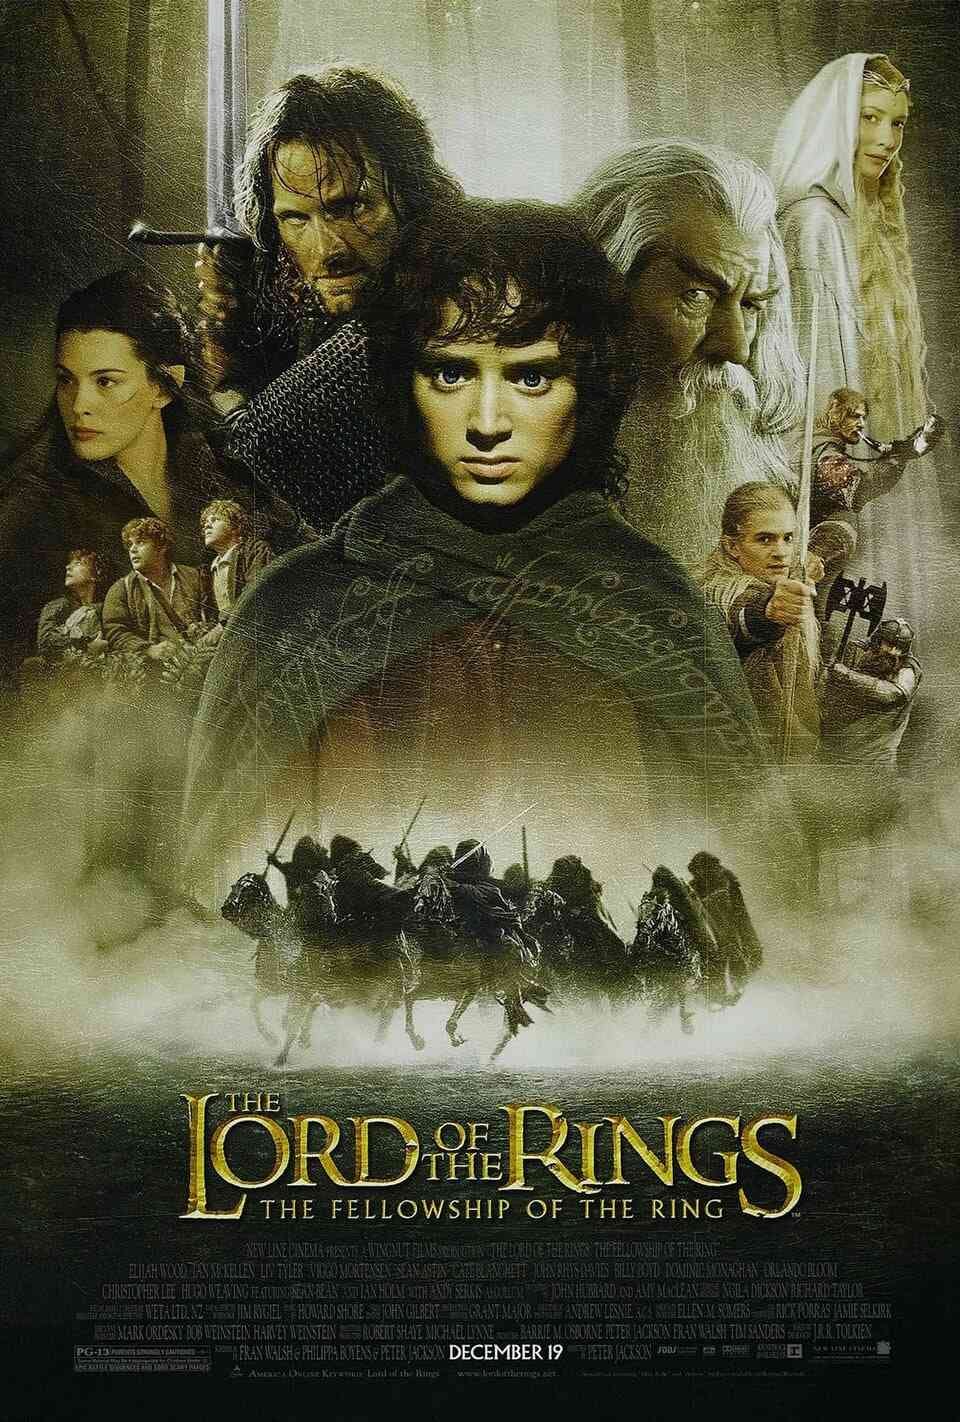 Read The Fellowship of the Ring screenplay.